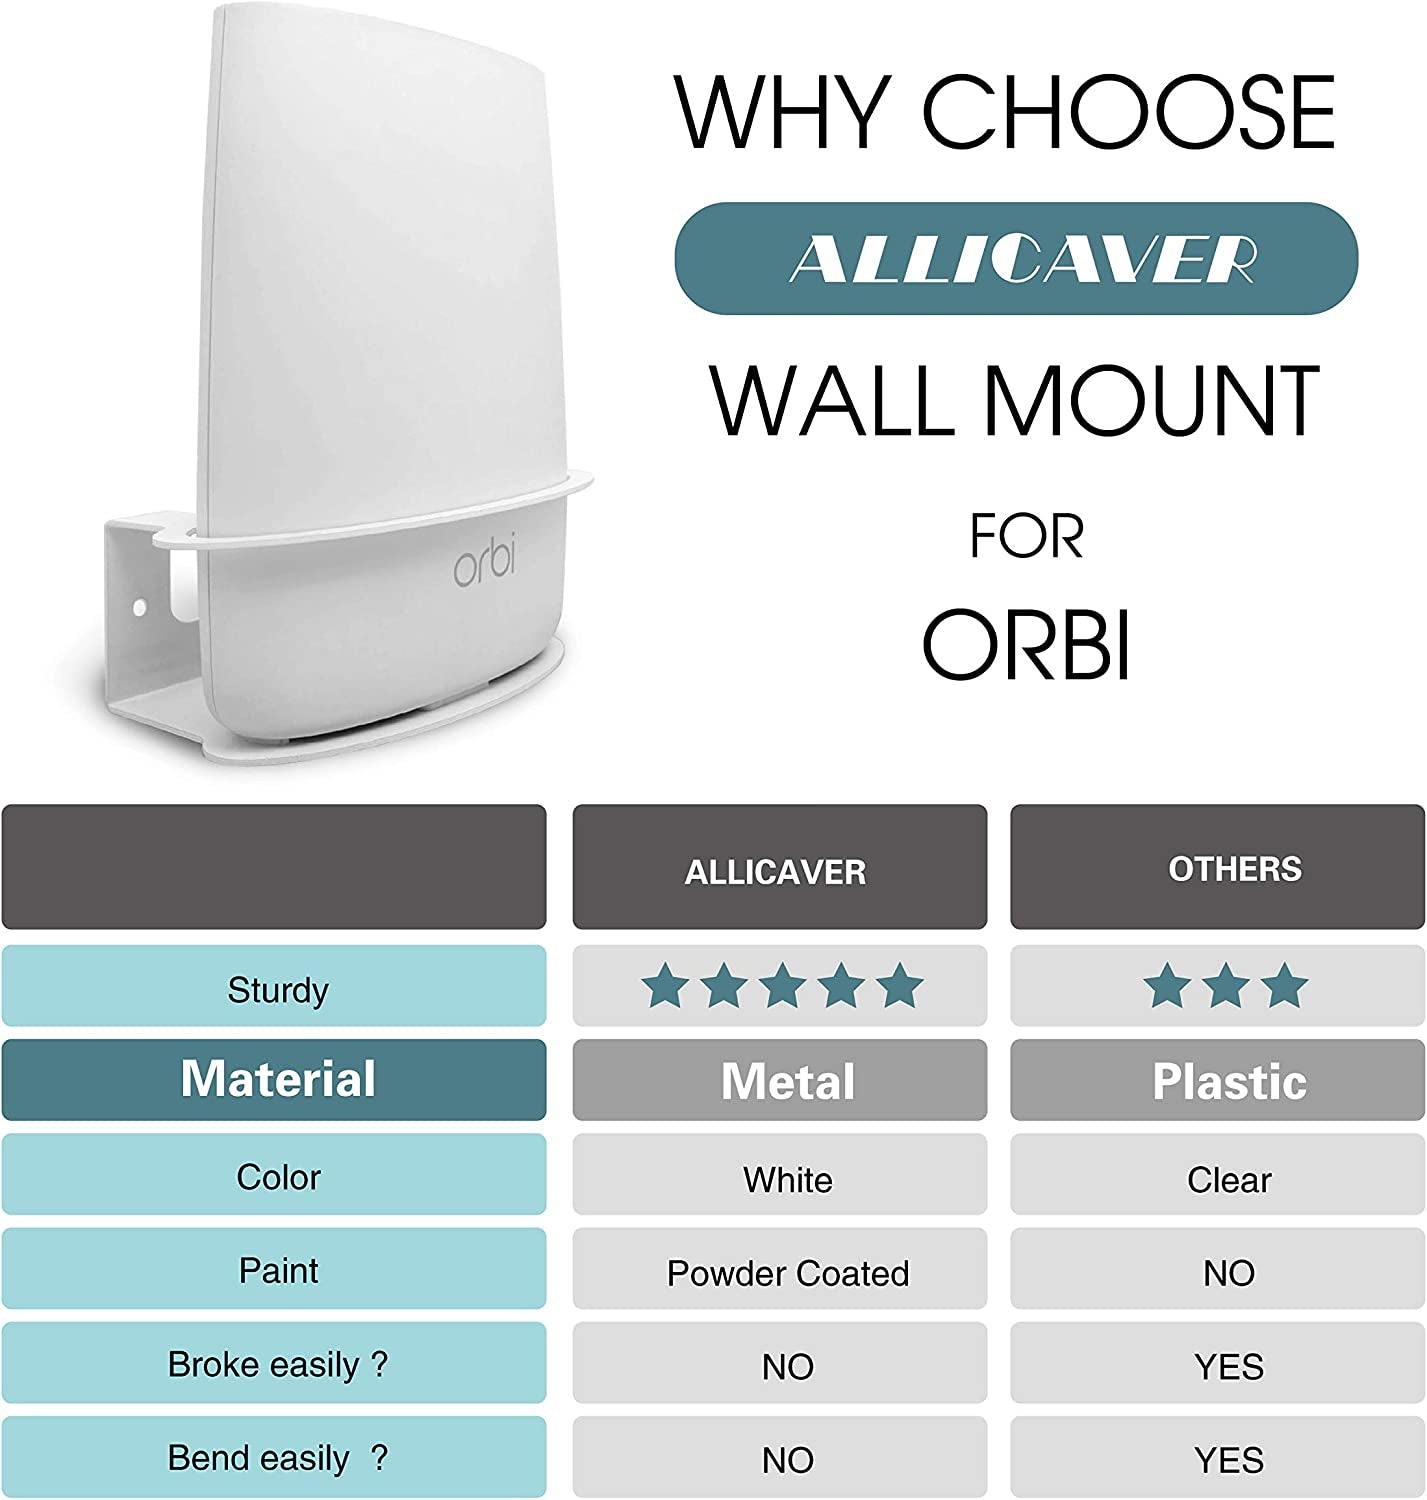 2 Pack Wall Mount Holder - Compatible Wall Bracket for Netgear Orbi, Sturdy Metal Stand Holder for Orbi Wifi Router Models RBS40, RBK40, RBS50, RBK50, AC2200, AC3000